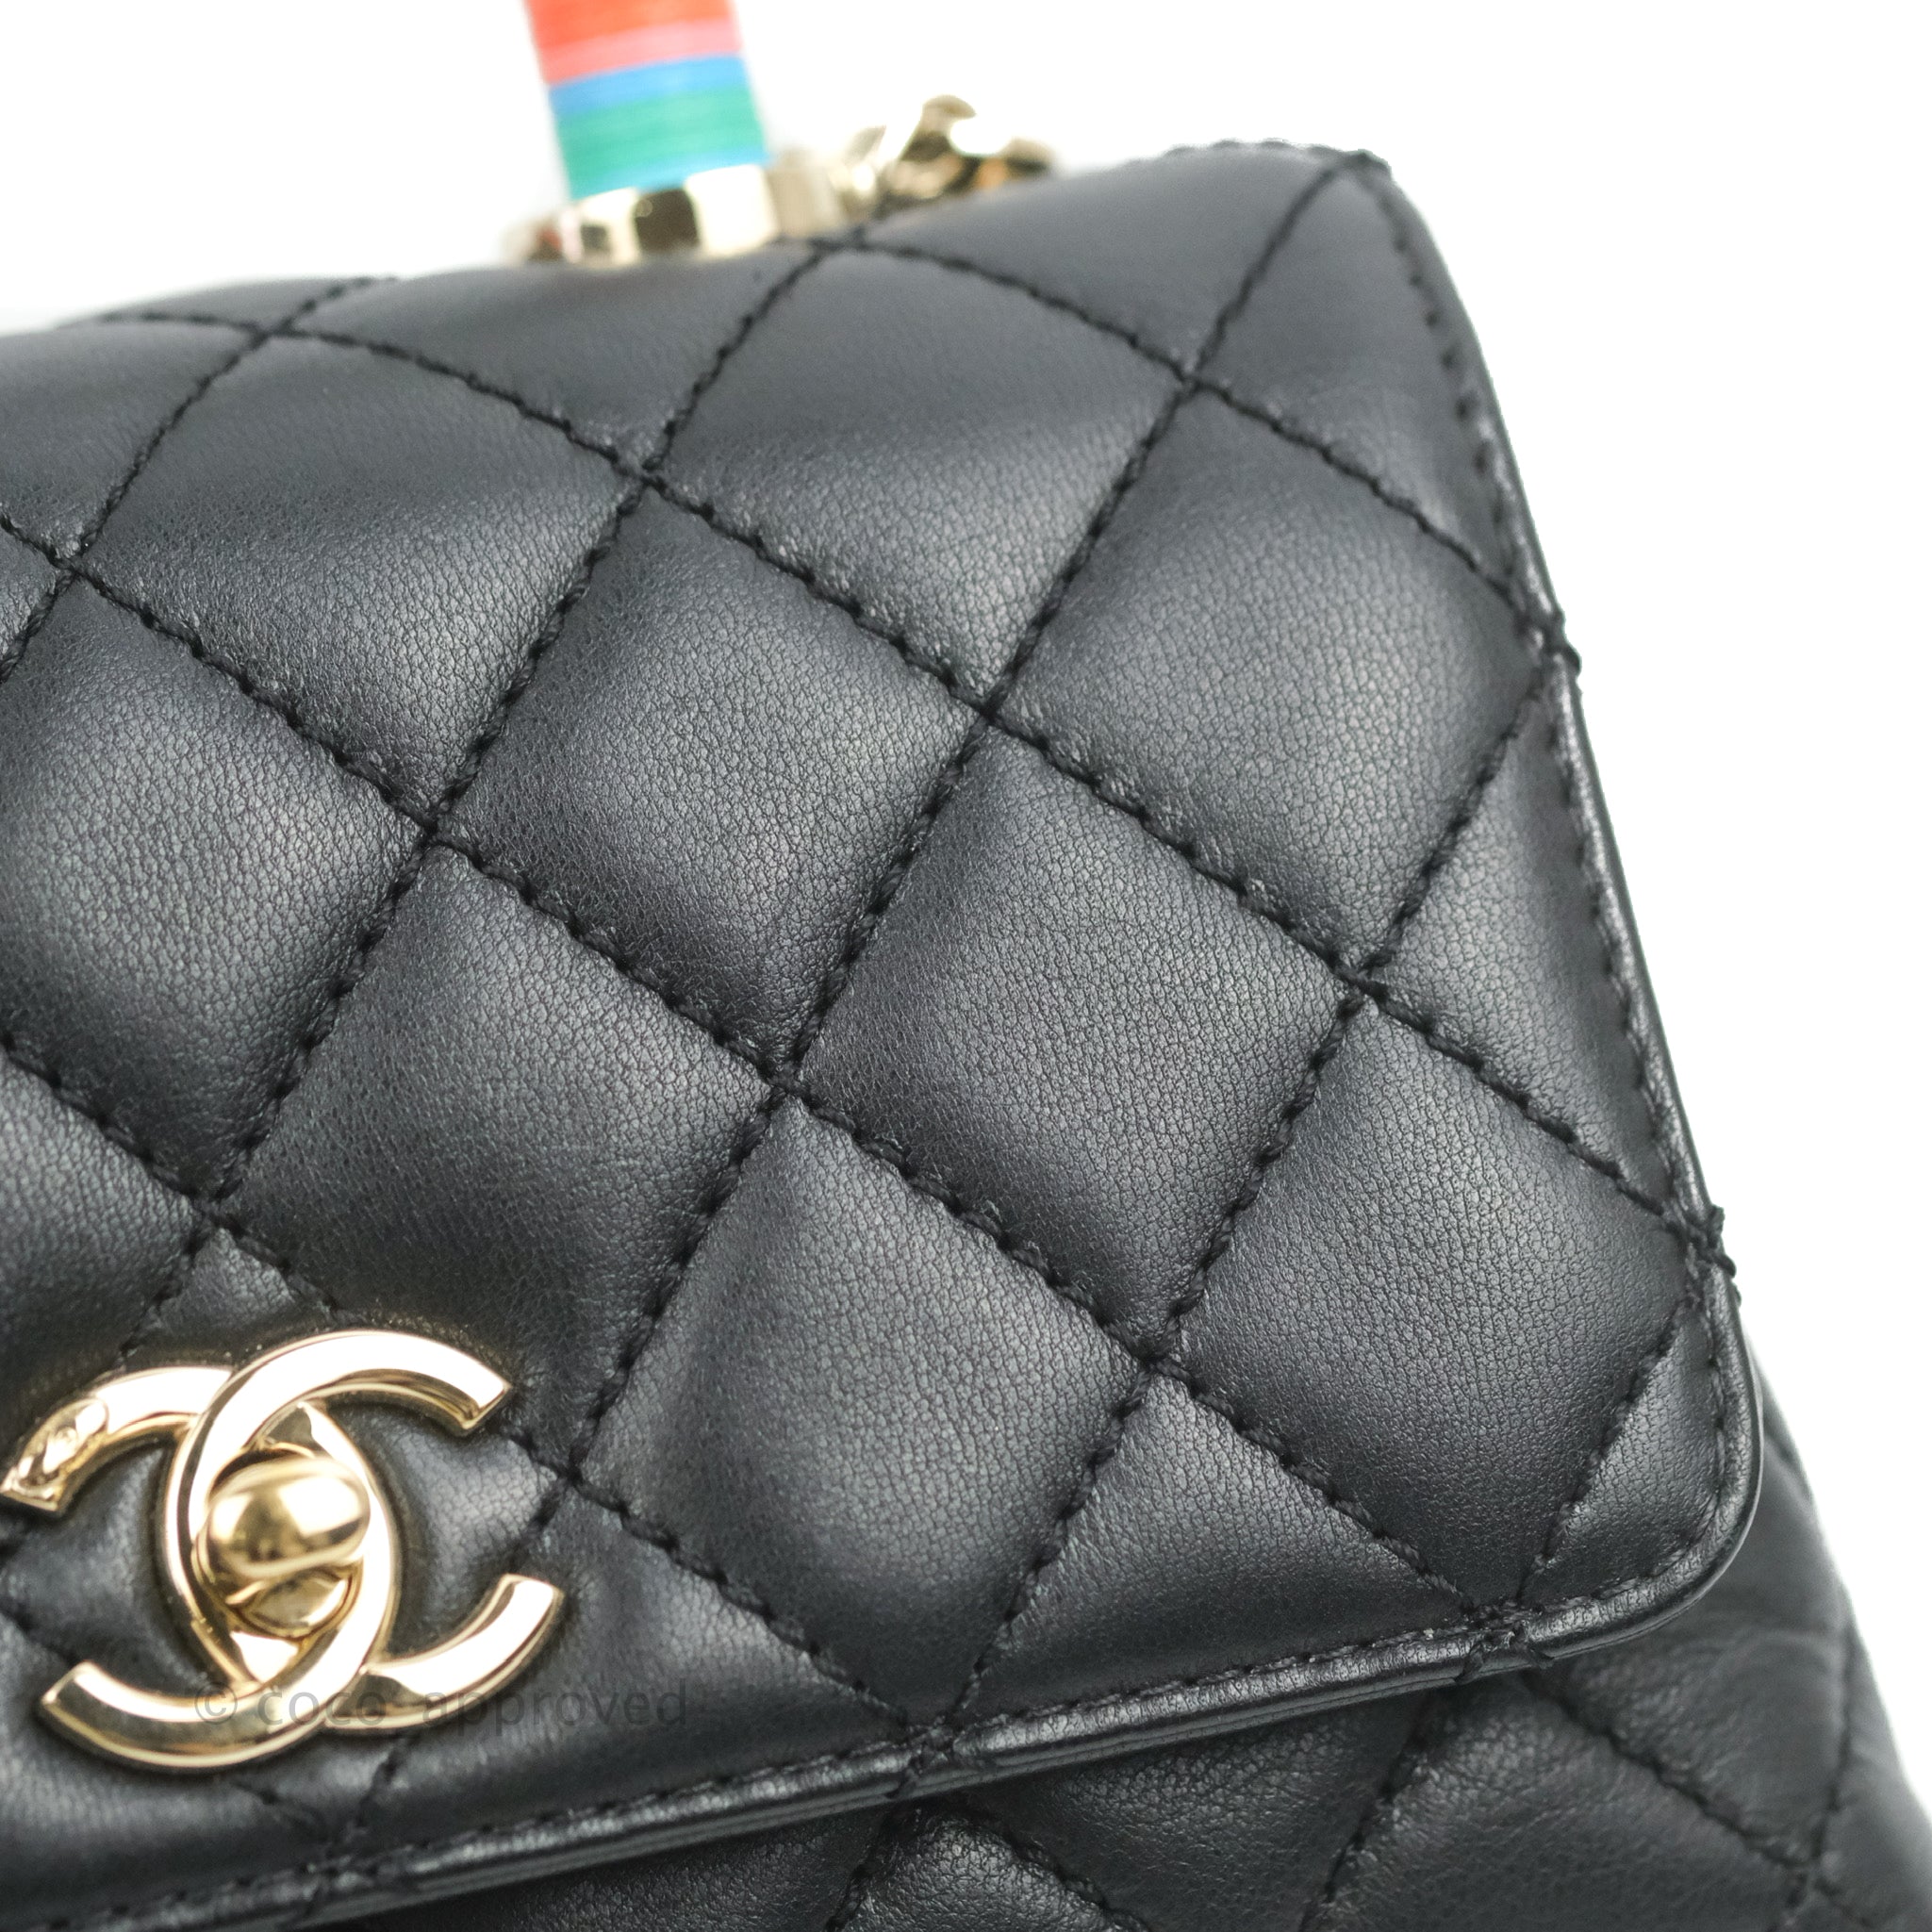 Chanel Quilted Mini Rainbow Coco Handle Bag Lambskin Black Gold Hardwa –  Coco Approved Studio